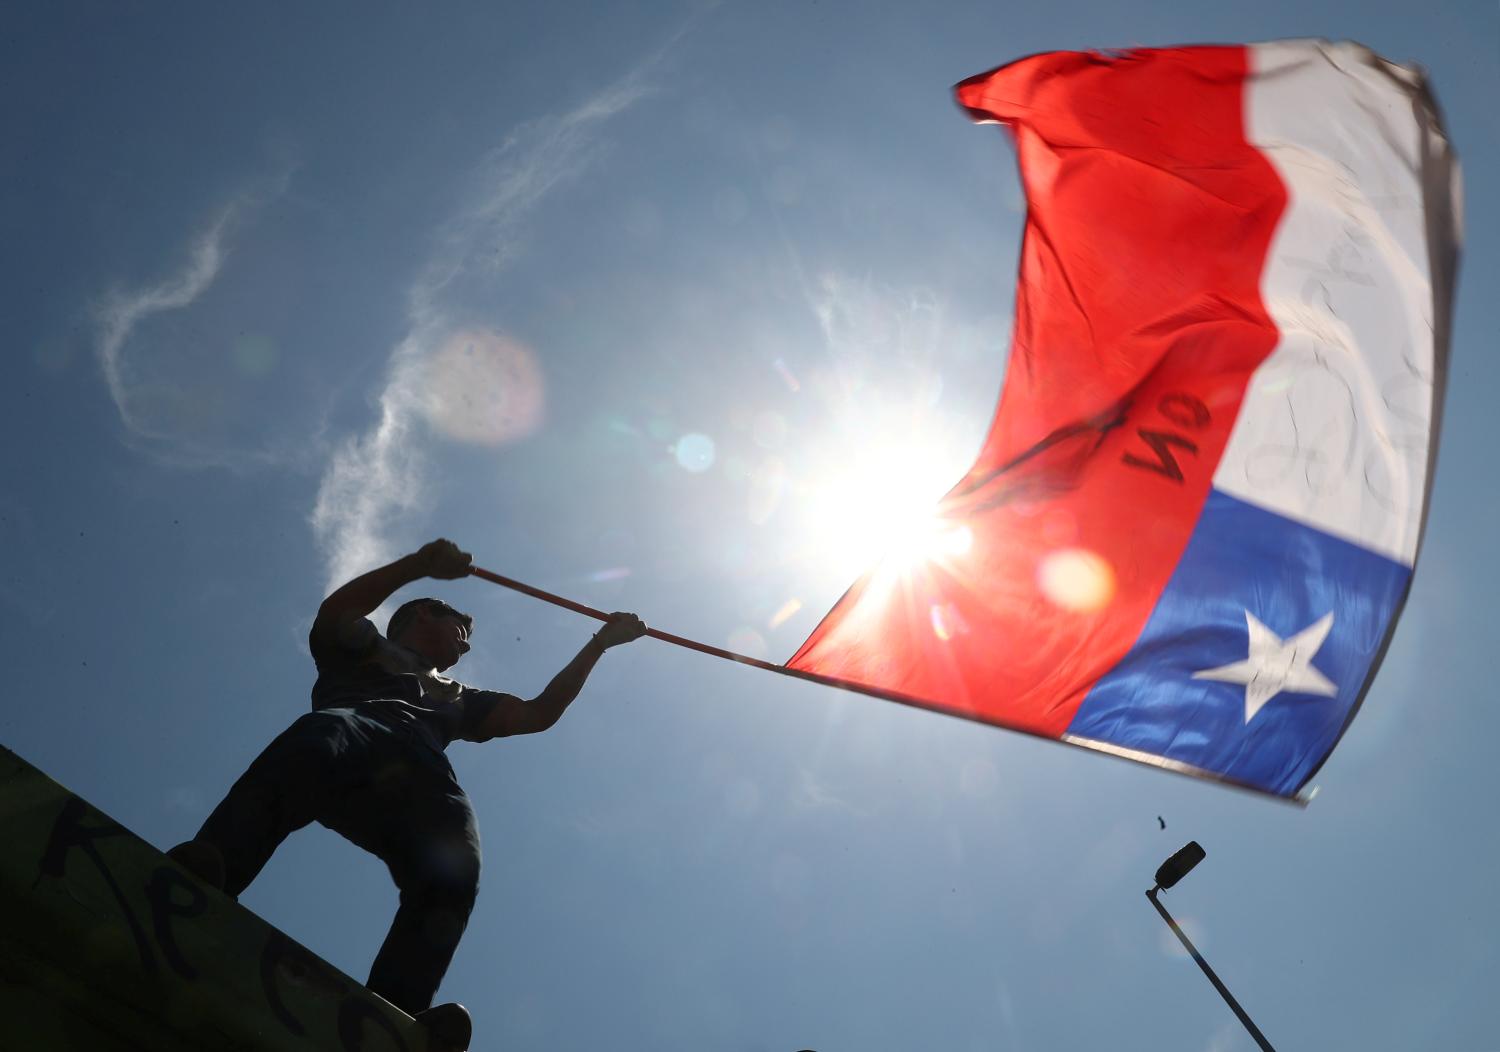 A person waves a Chilean flag during a protest against Chile's government in Santiago, Chile November 12, 2019. REUTERS/Pilar Olivares - RC2S9D9CL74K